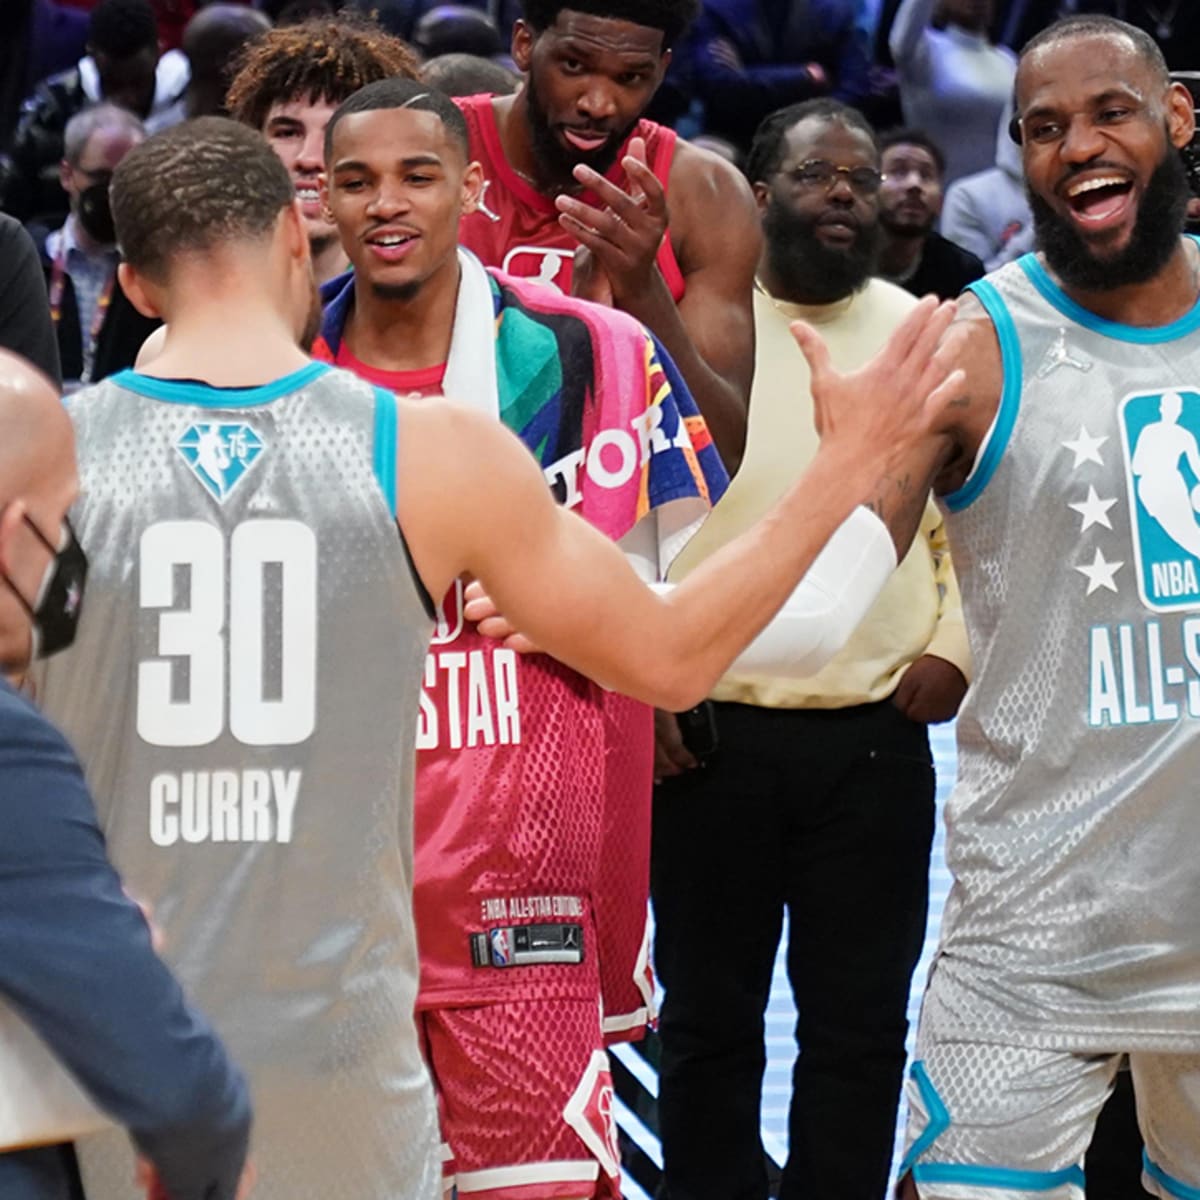 NBA All-Star Game 2022 results, highlights: Curry drops 50, LeBron